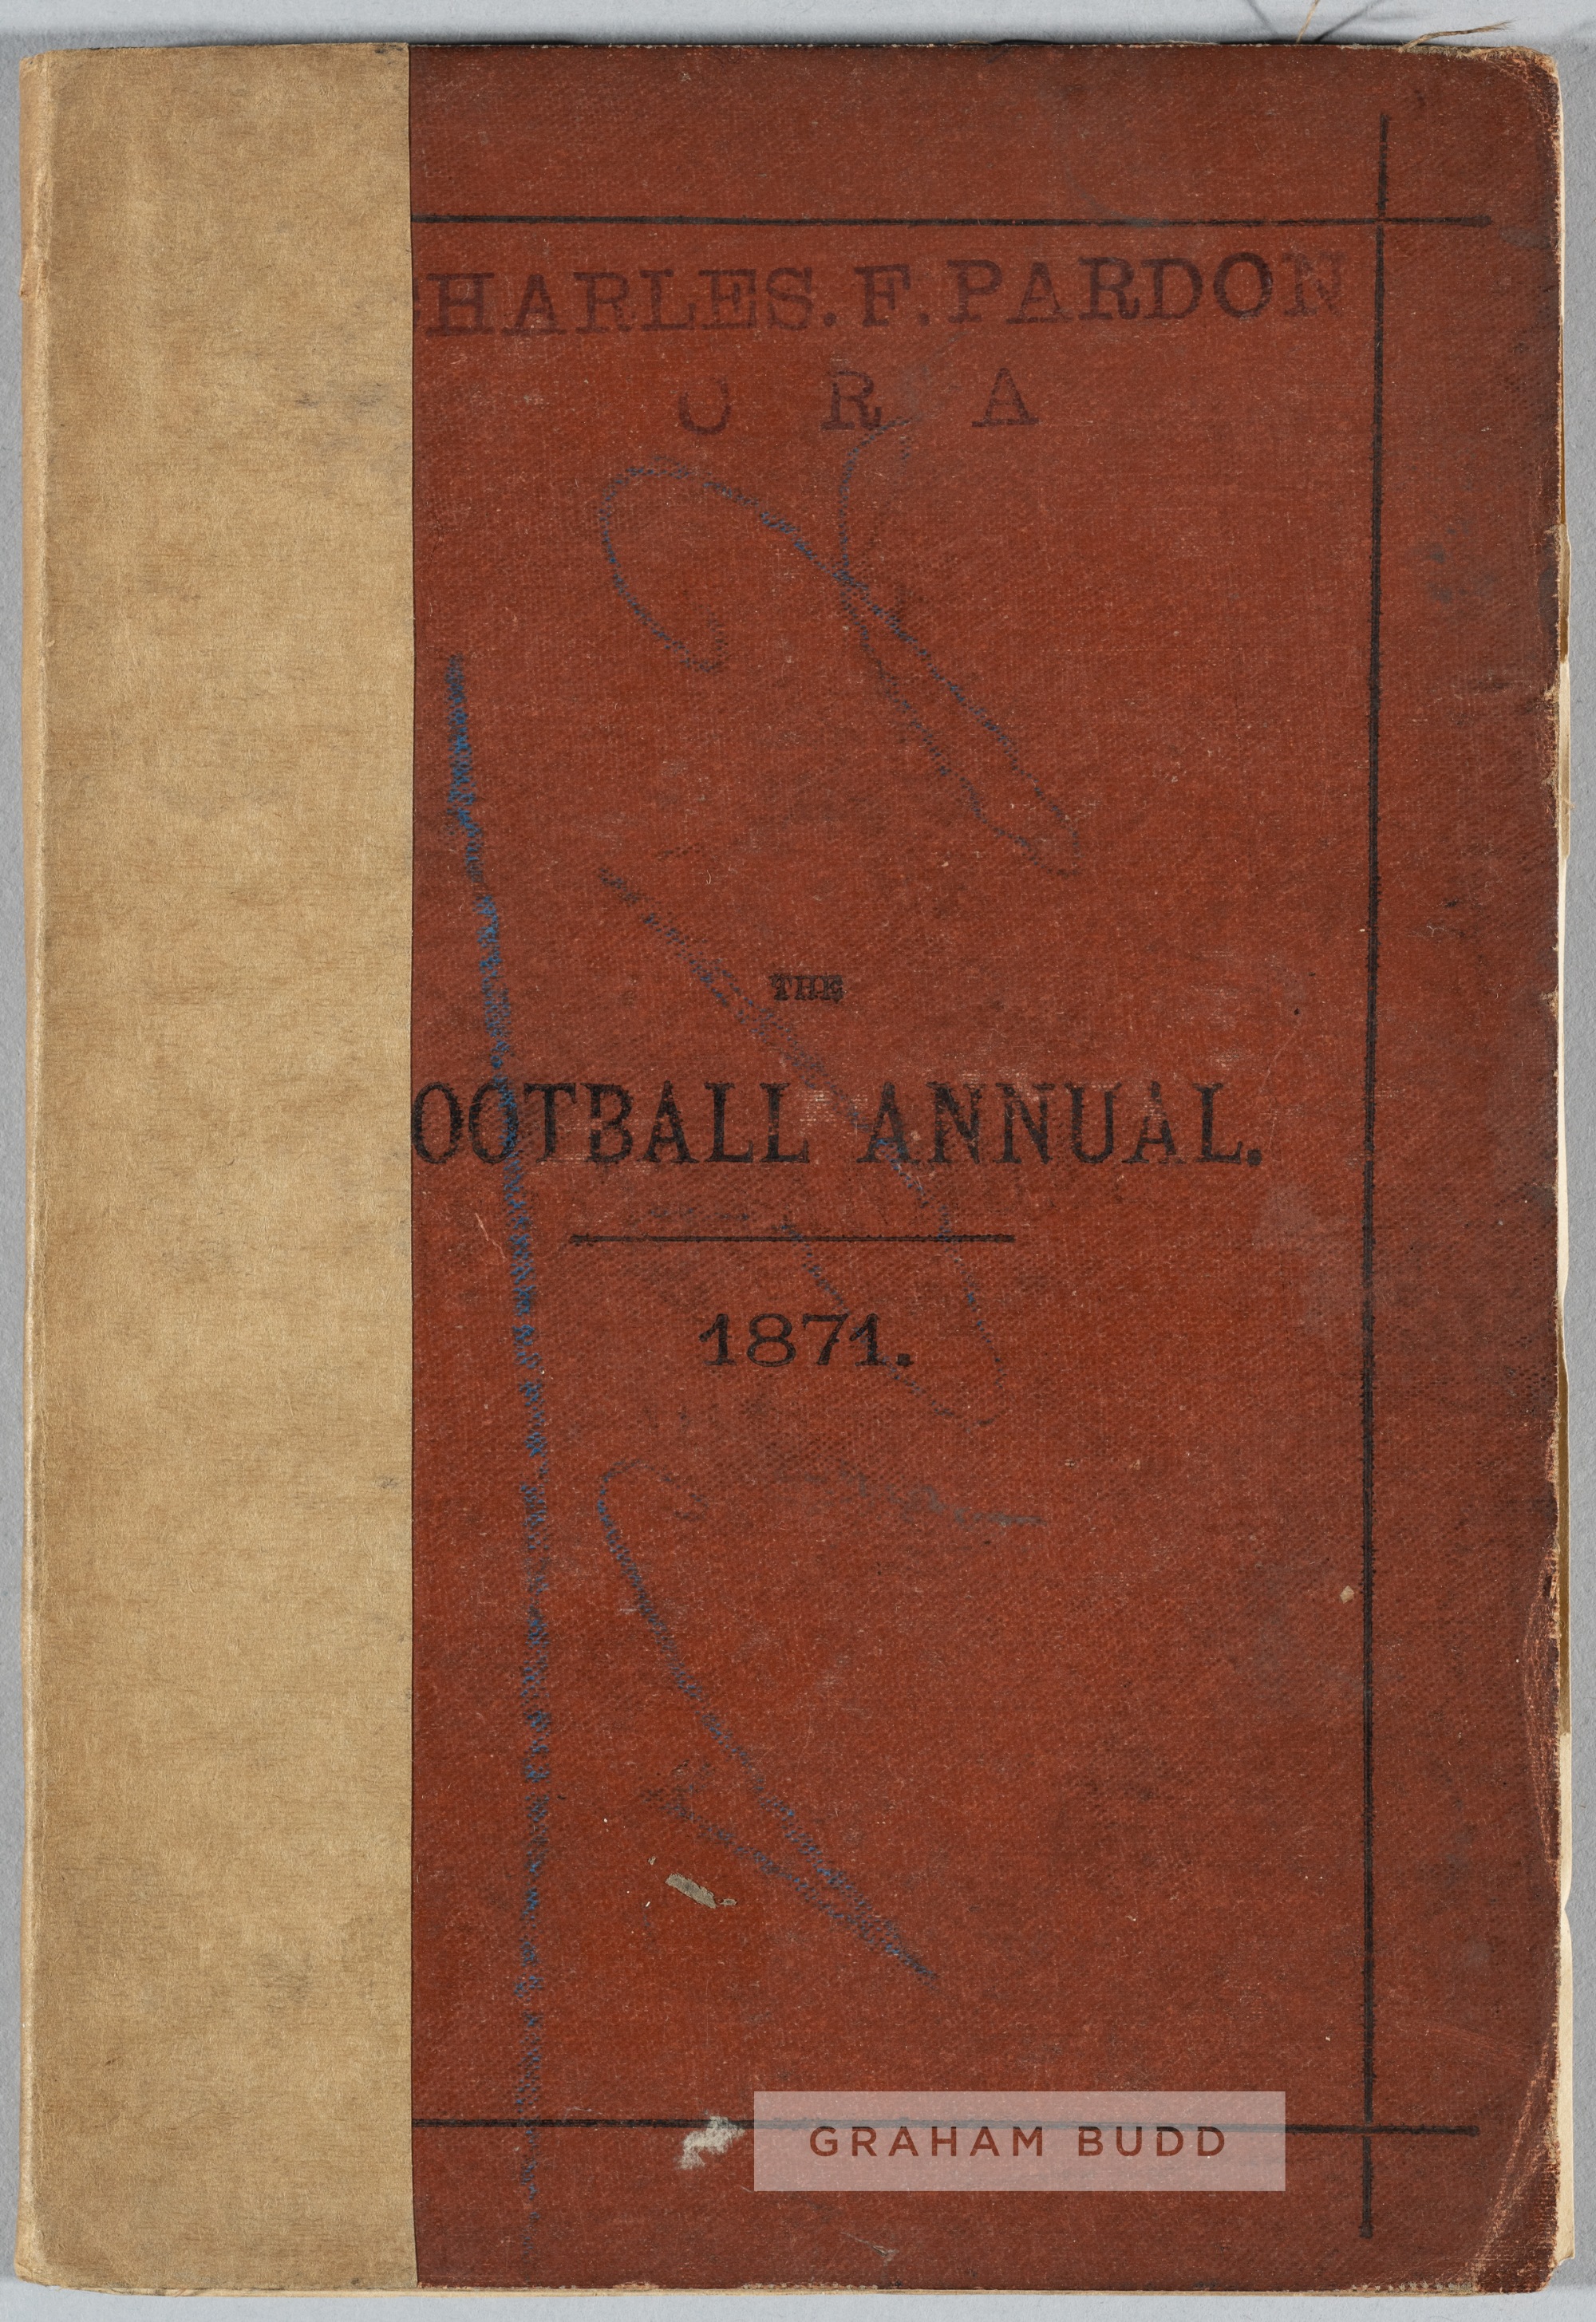 The Football Annual 1871, edited by Charles W. Alcock, published by Virtue & Co., London, third